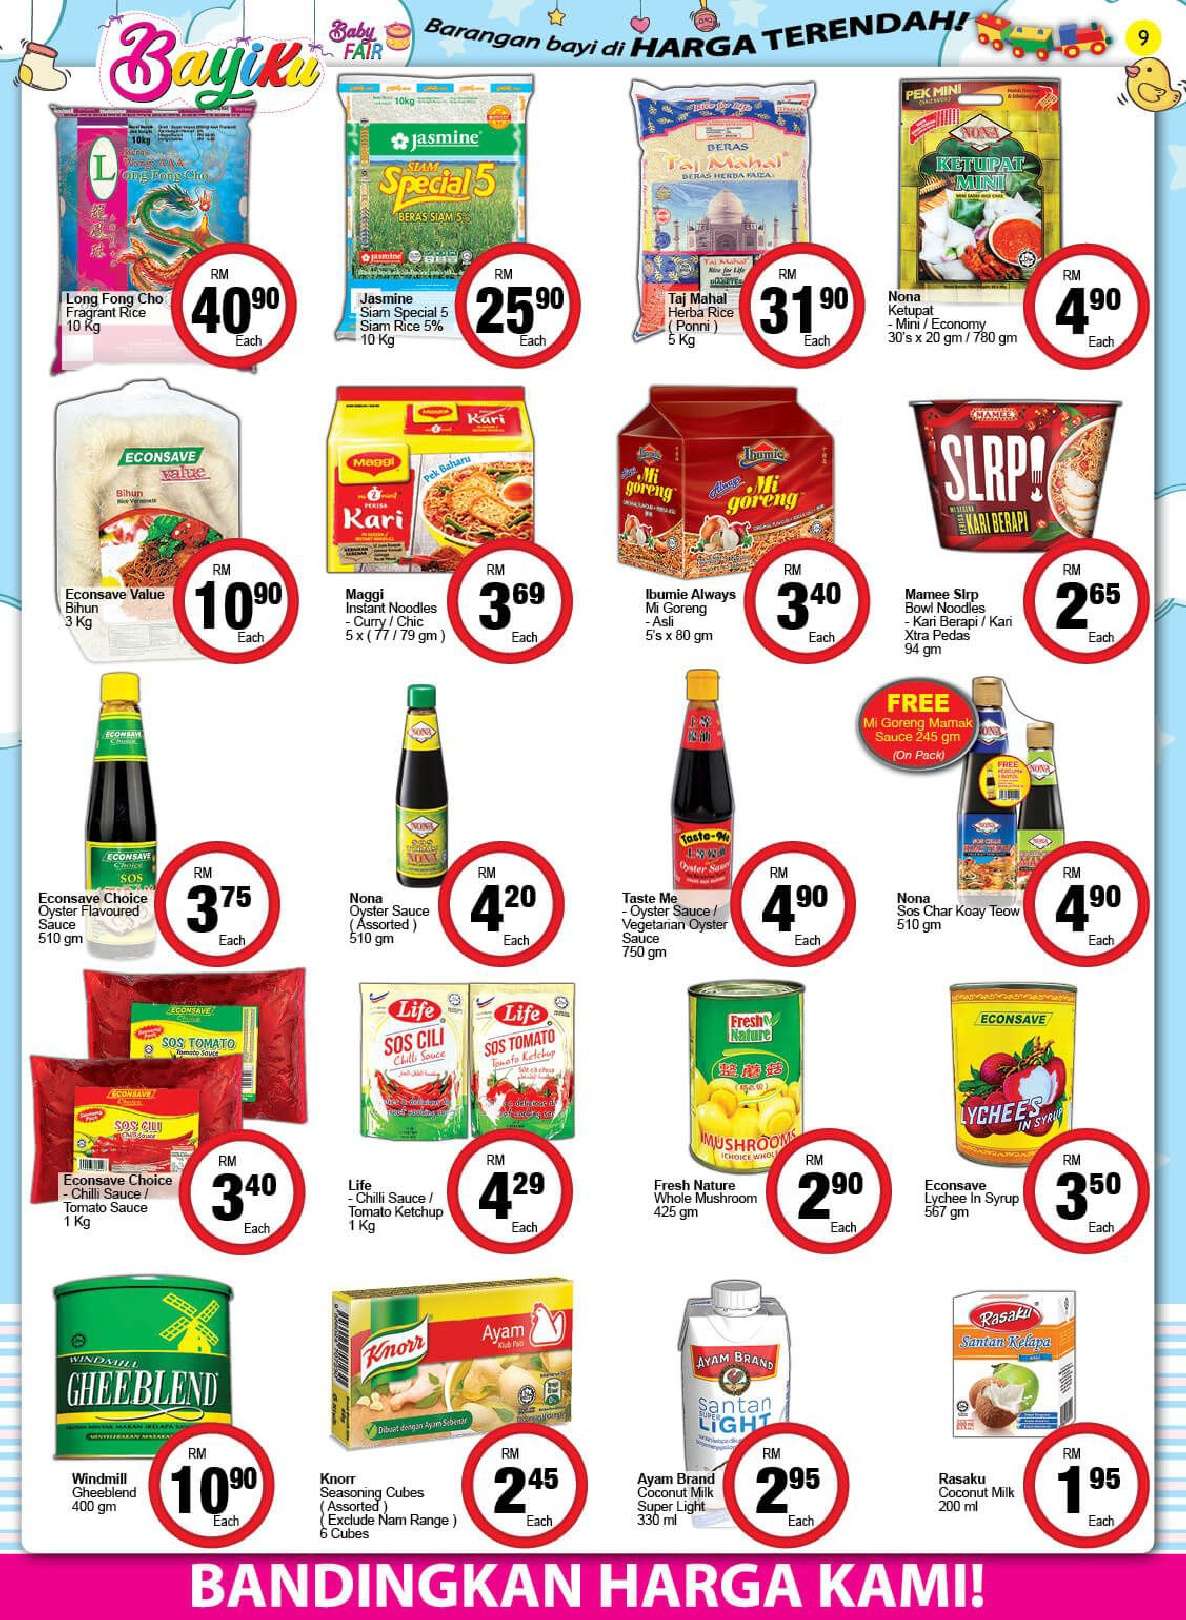 EconSave Catalogue (24 July 2020 - 4 August 2020)